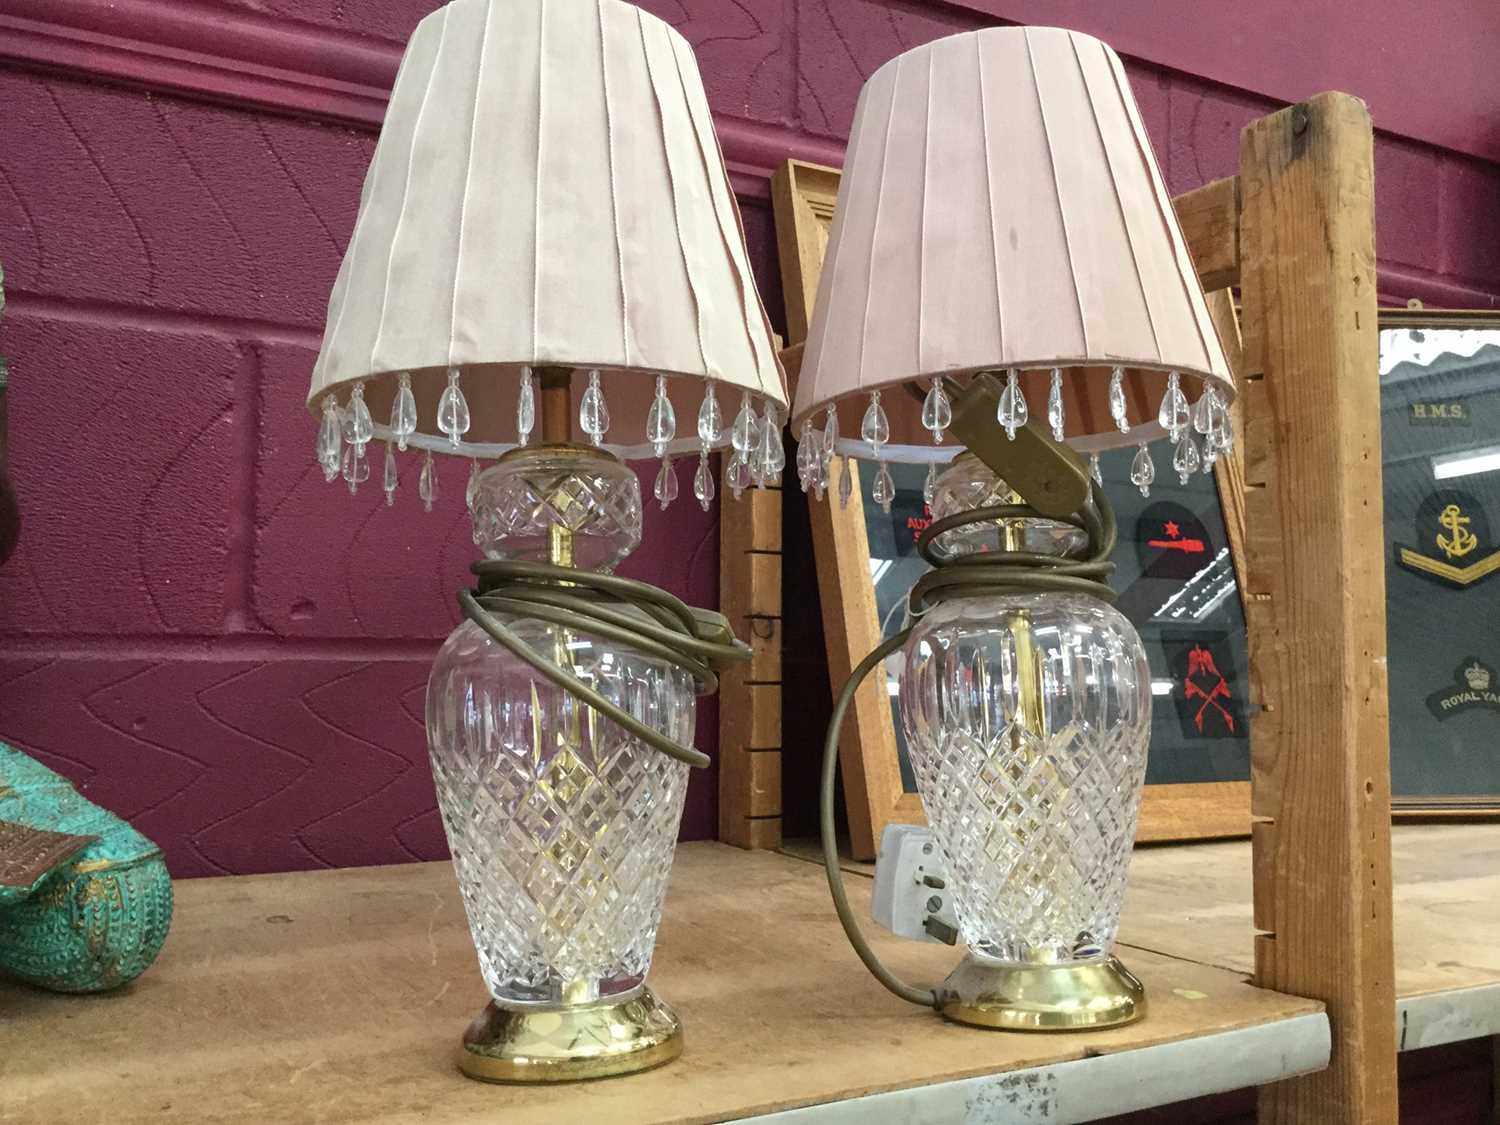 Lot 94 - Good quality pair of cut glass table lamps with shades